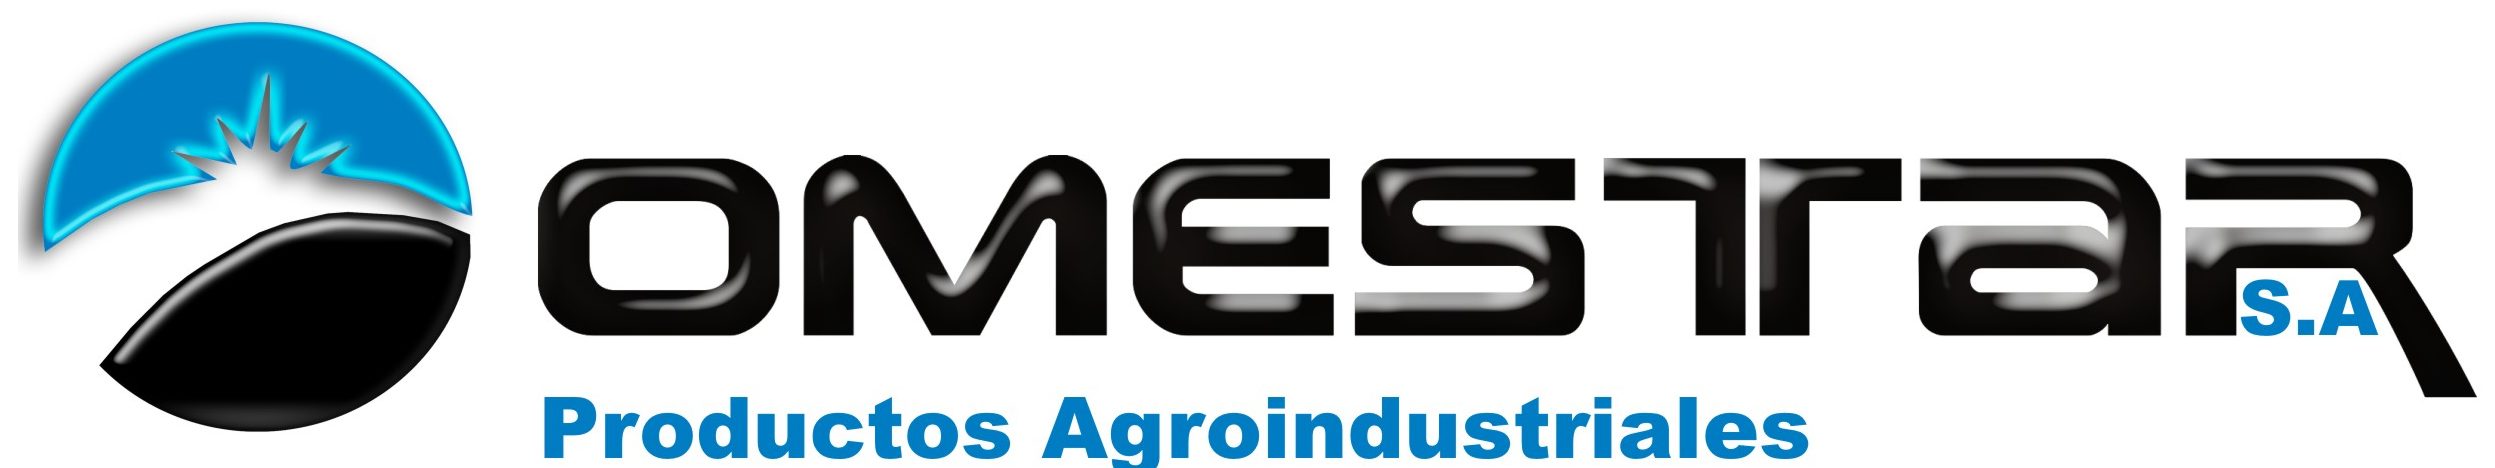 OMESTAR :: Productos Agroindustriales